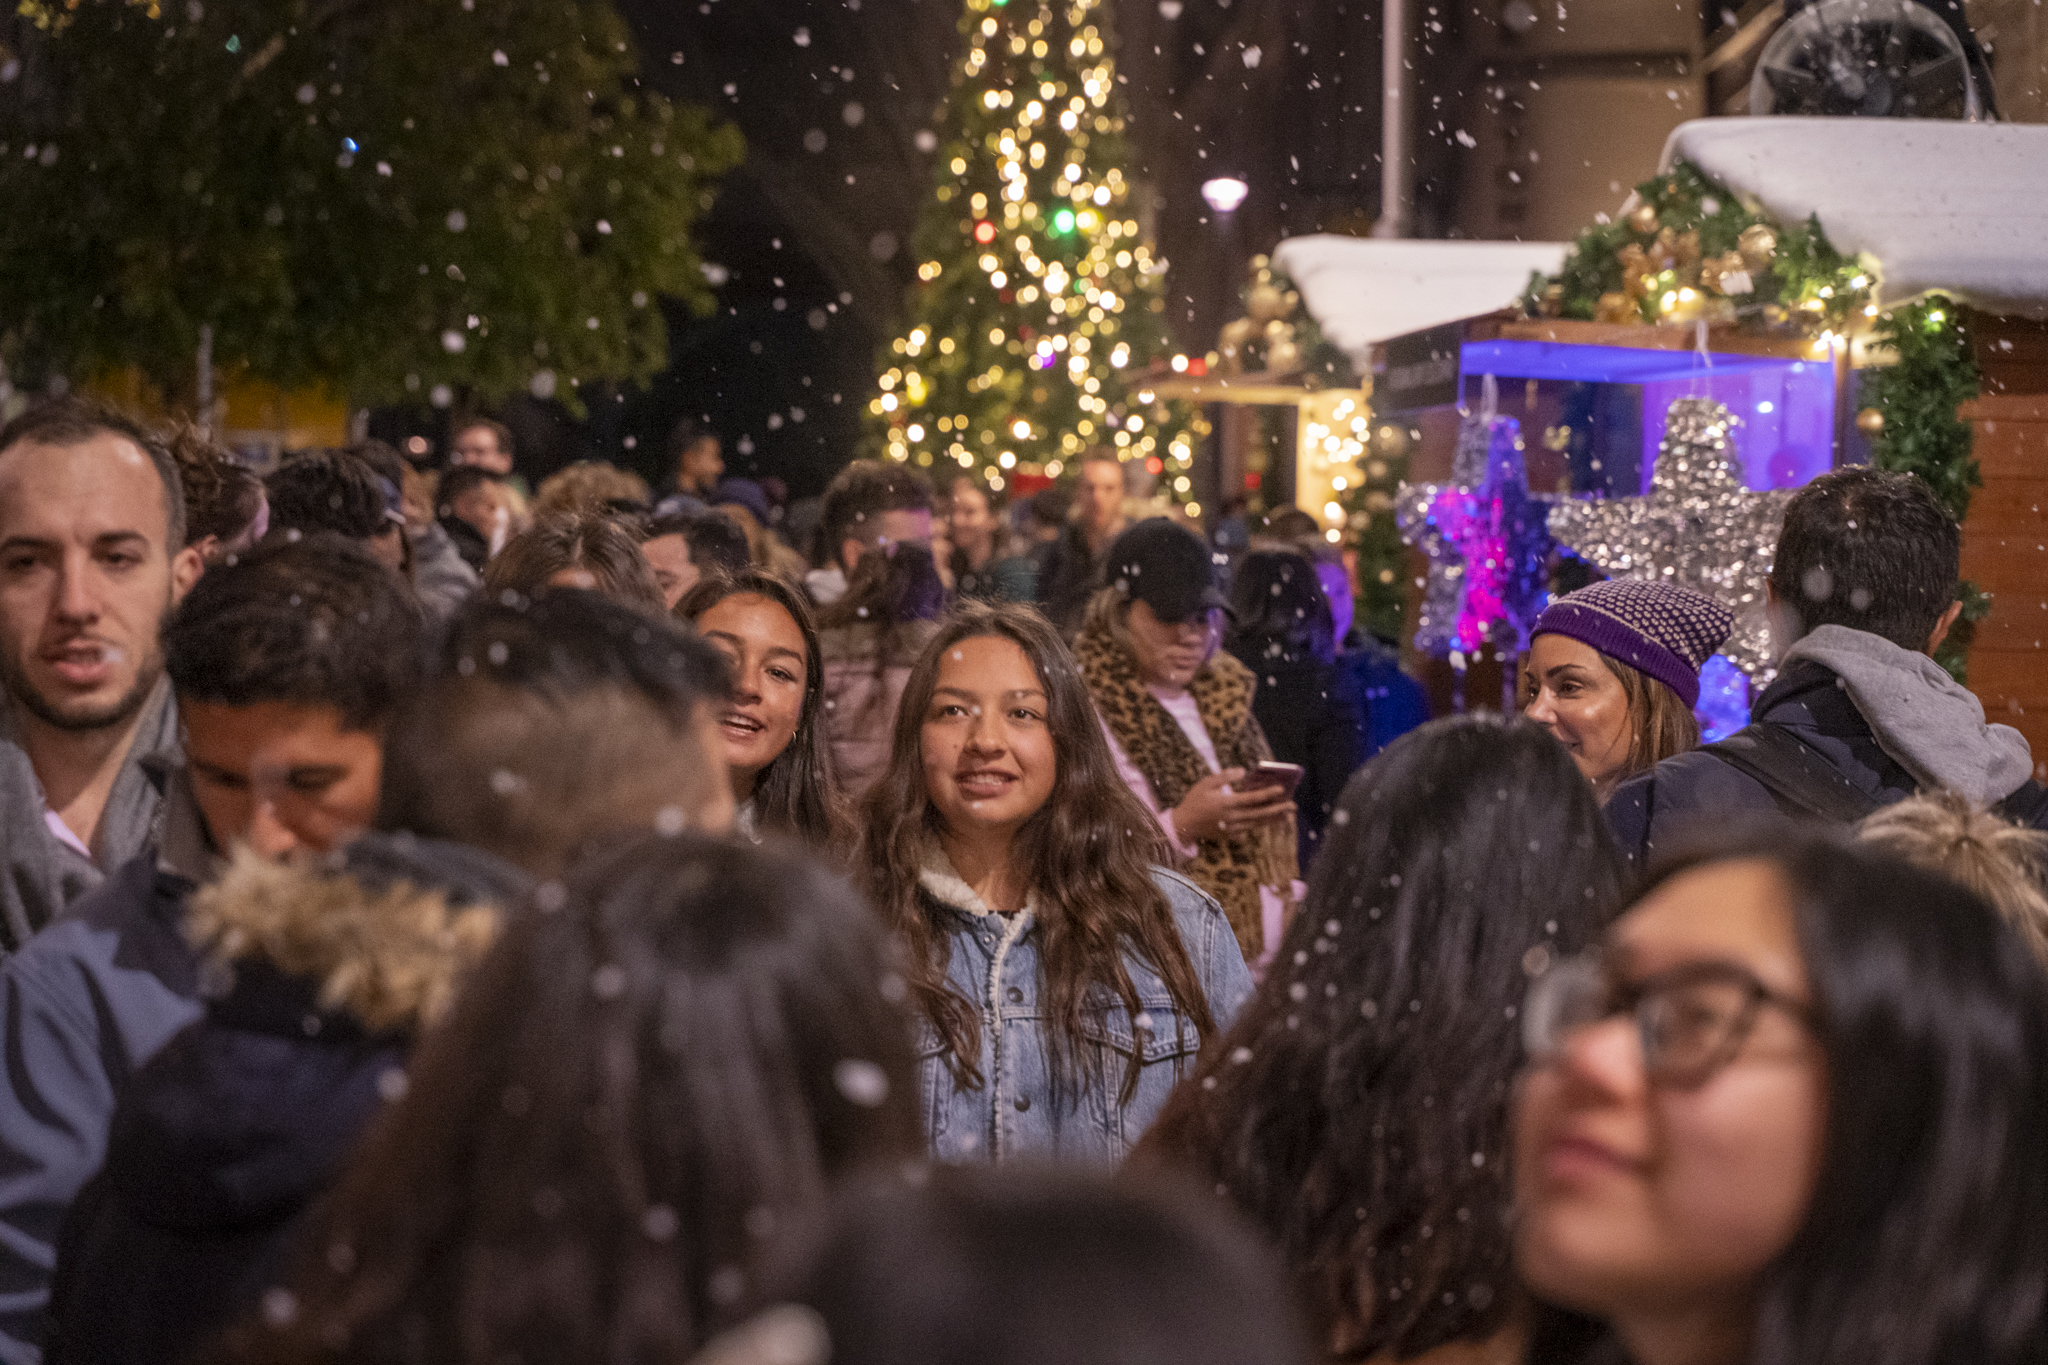 Tis' the season ... finally! A Christmas in July Festival is dashing through the snow this Winter in Canberra